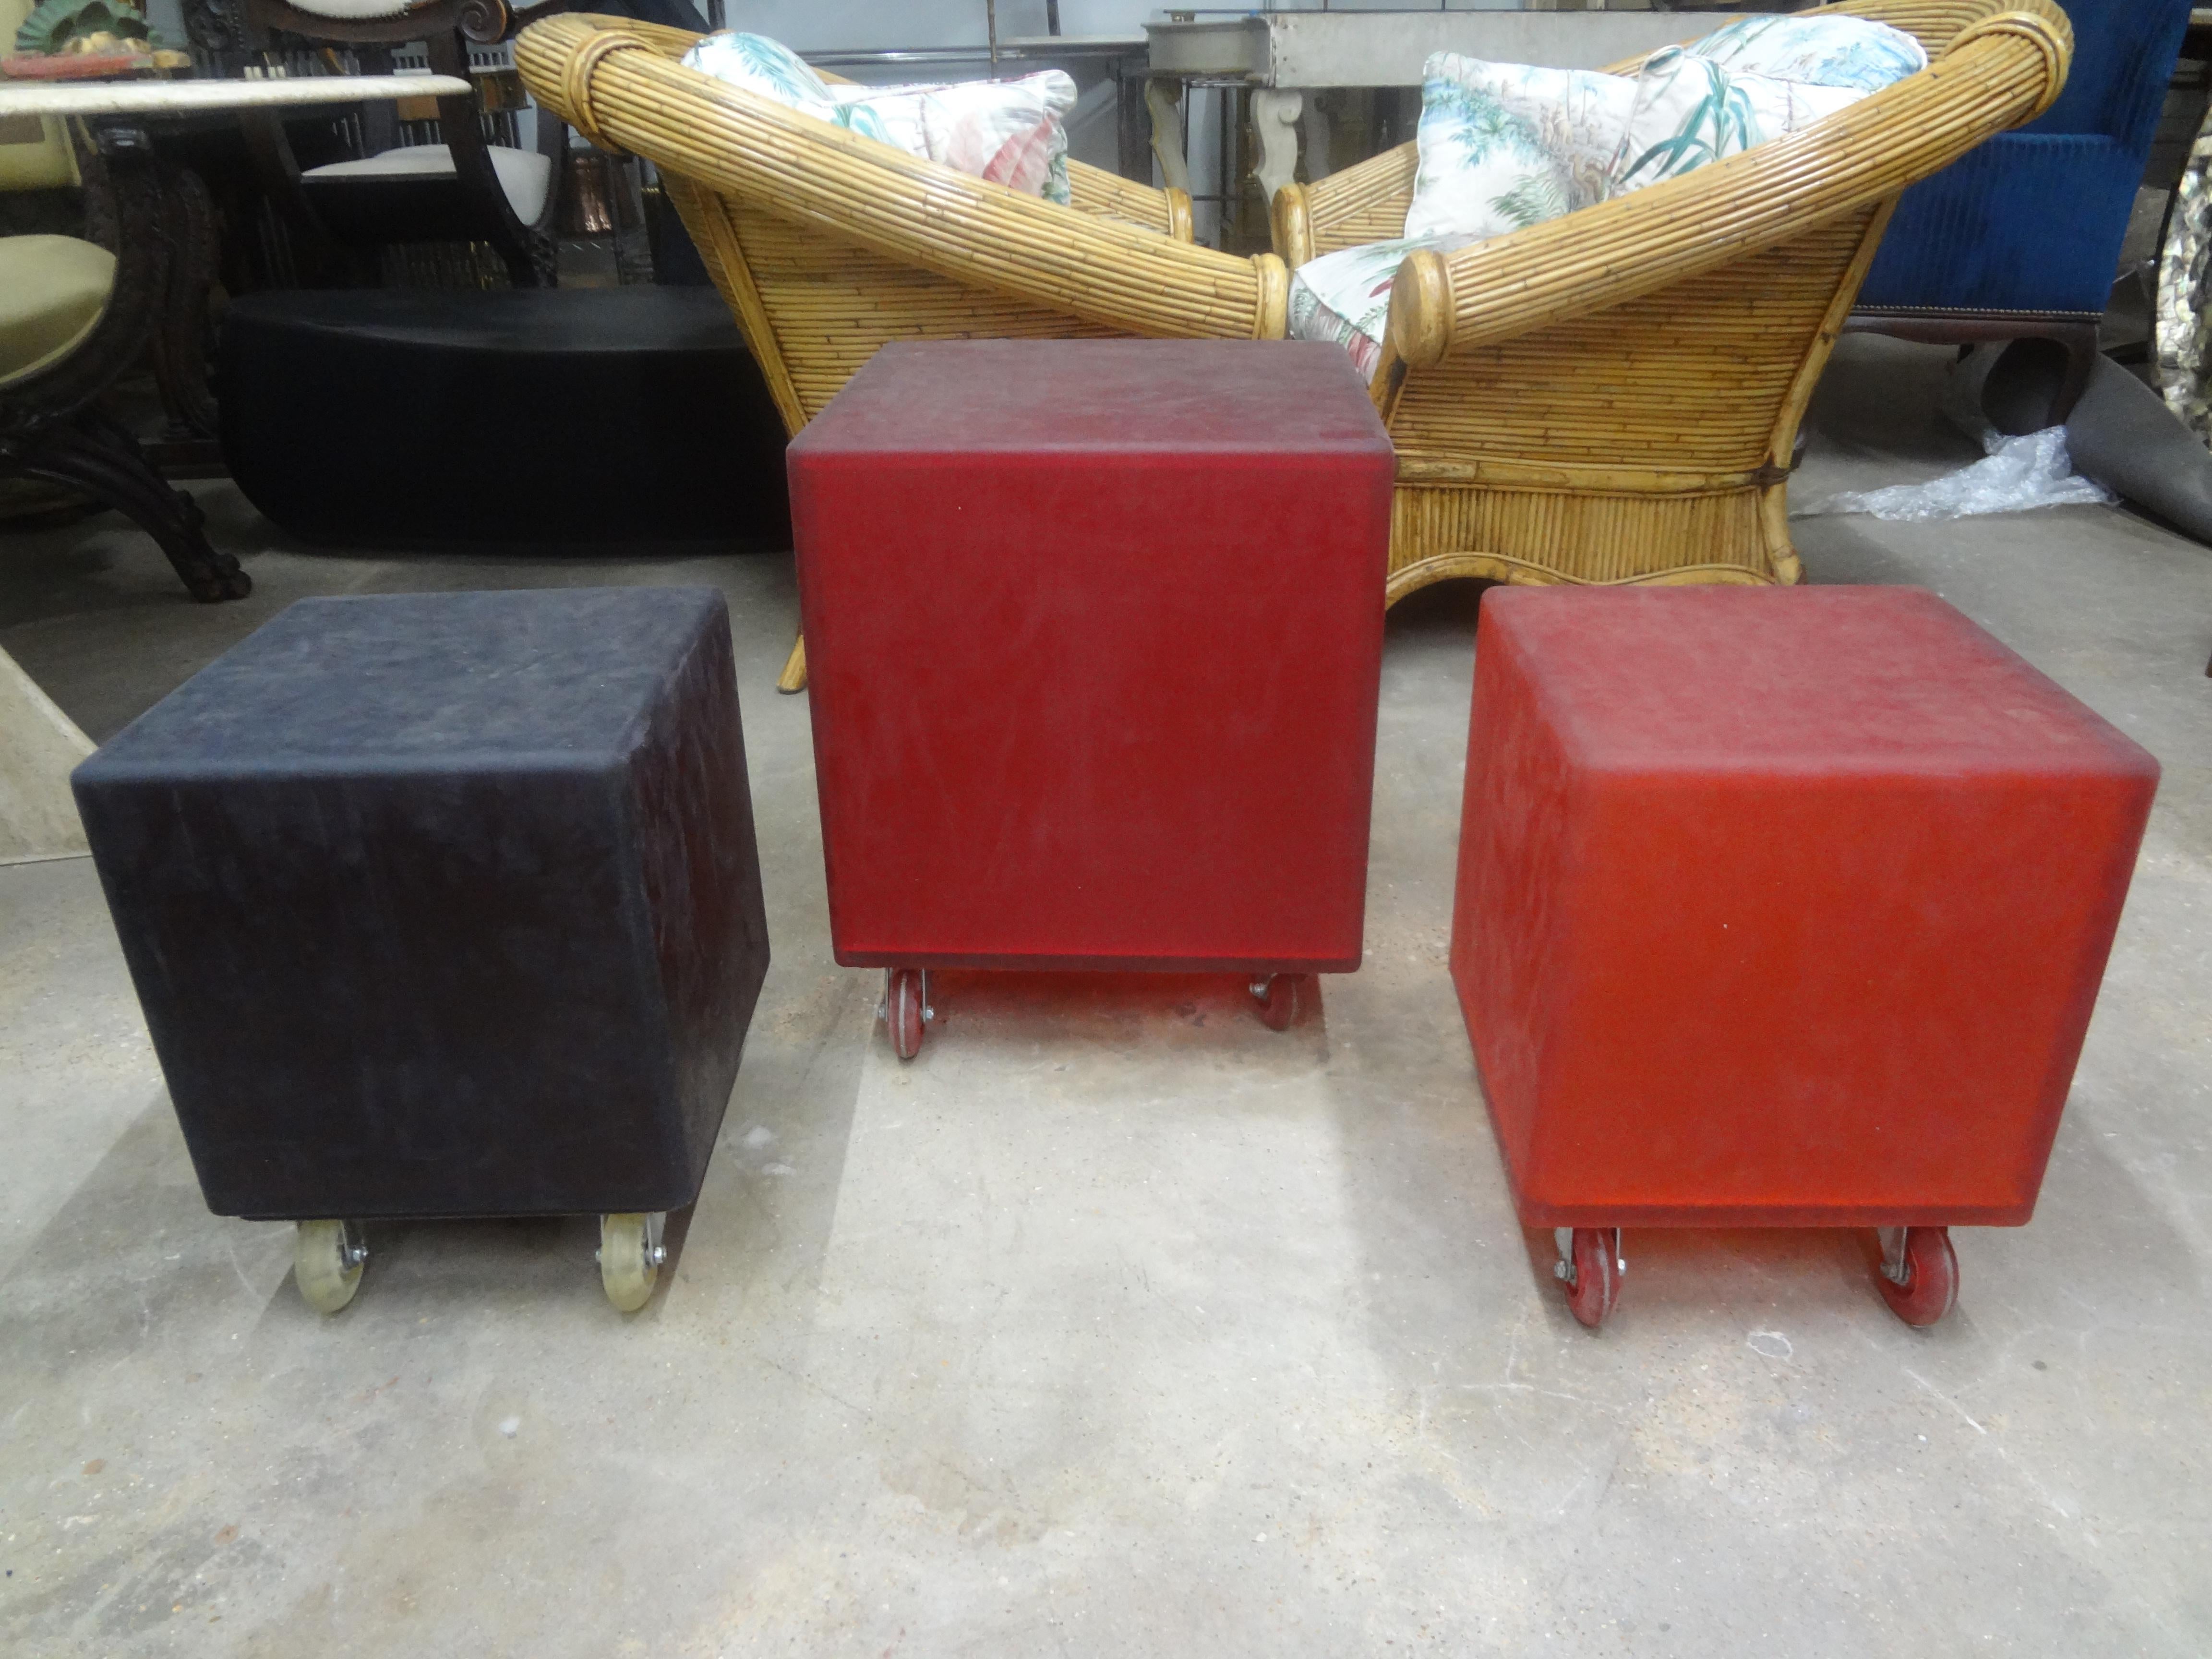 Set Of 3 Mid Century Modern Rubber Cube Tables Or Ottomans.
Great set of mid century modern cubes on casters. Two smaller ones are 15.82 inches H, 12.13